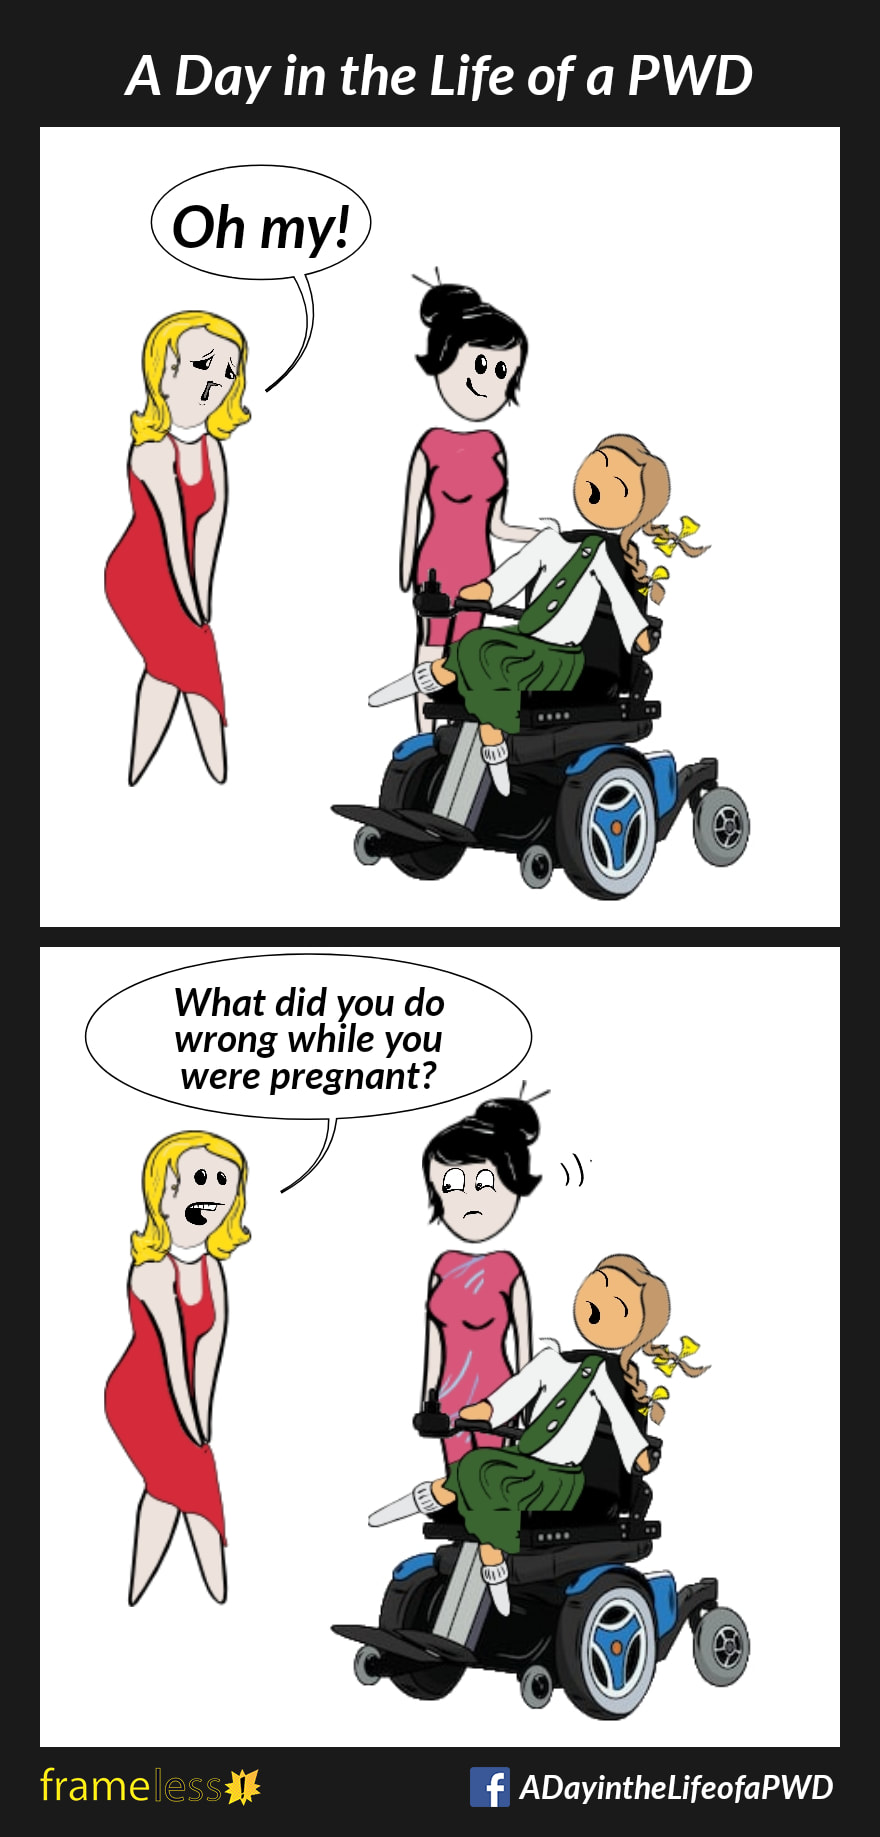 COMIC STRIP 
A Day in the Life of a PWD (Person With a Disability) 

Frame 1:
A smiling mother is tending to her daughter, who is in a power wheelchair.
A stranger approaches and looks at the child sympathetically. 
STRANGER: Oh my!

Frame 2:
STRANGER (to mother): What did you do wrong while you were pregnant?